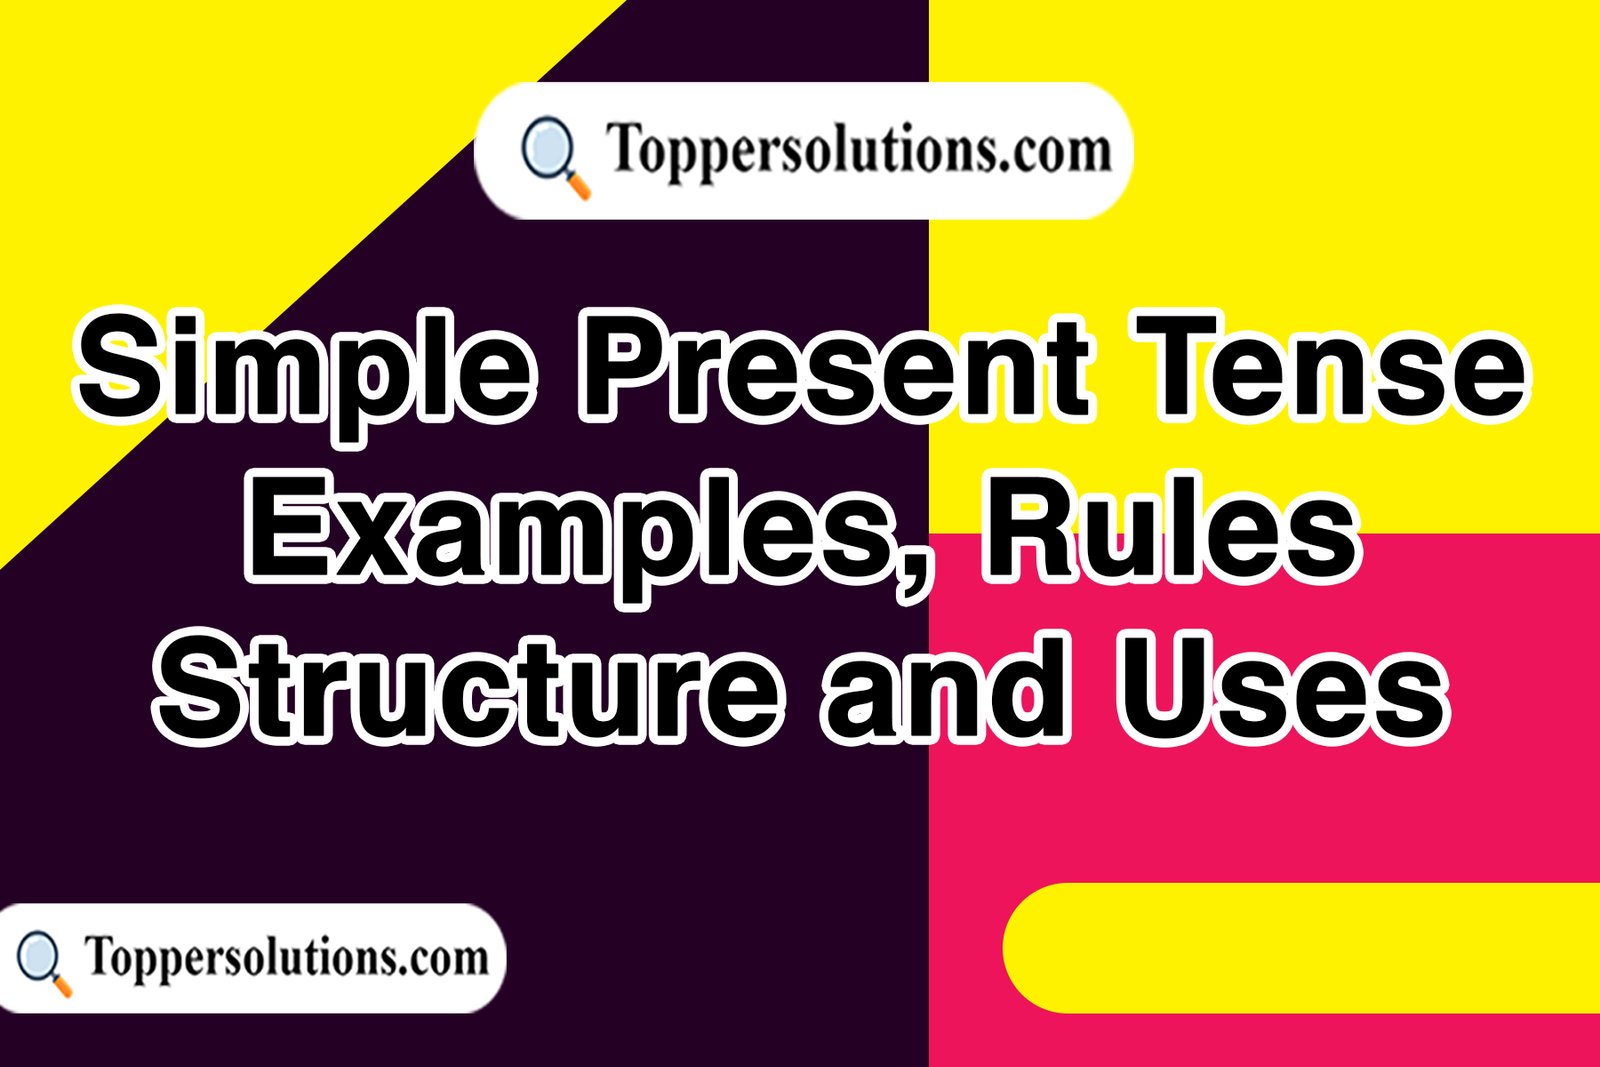 Simple Present Tense - Definition, Structure, Rules, Uses